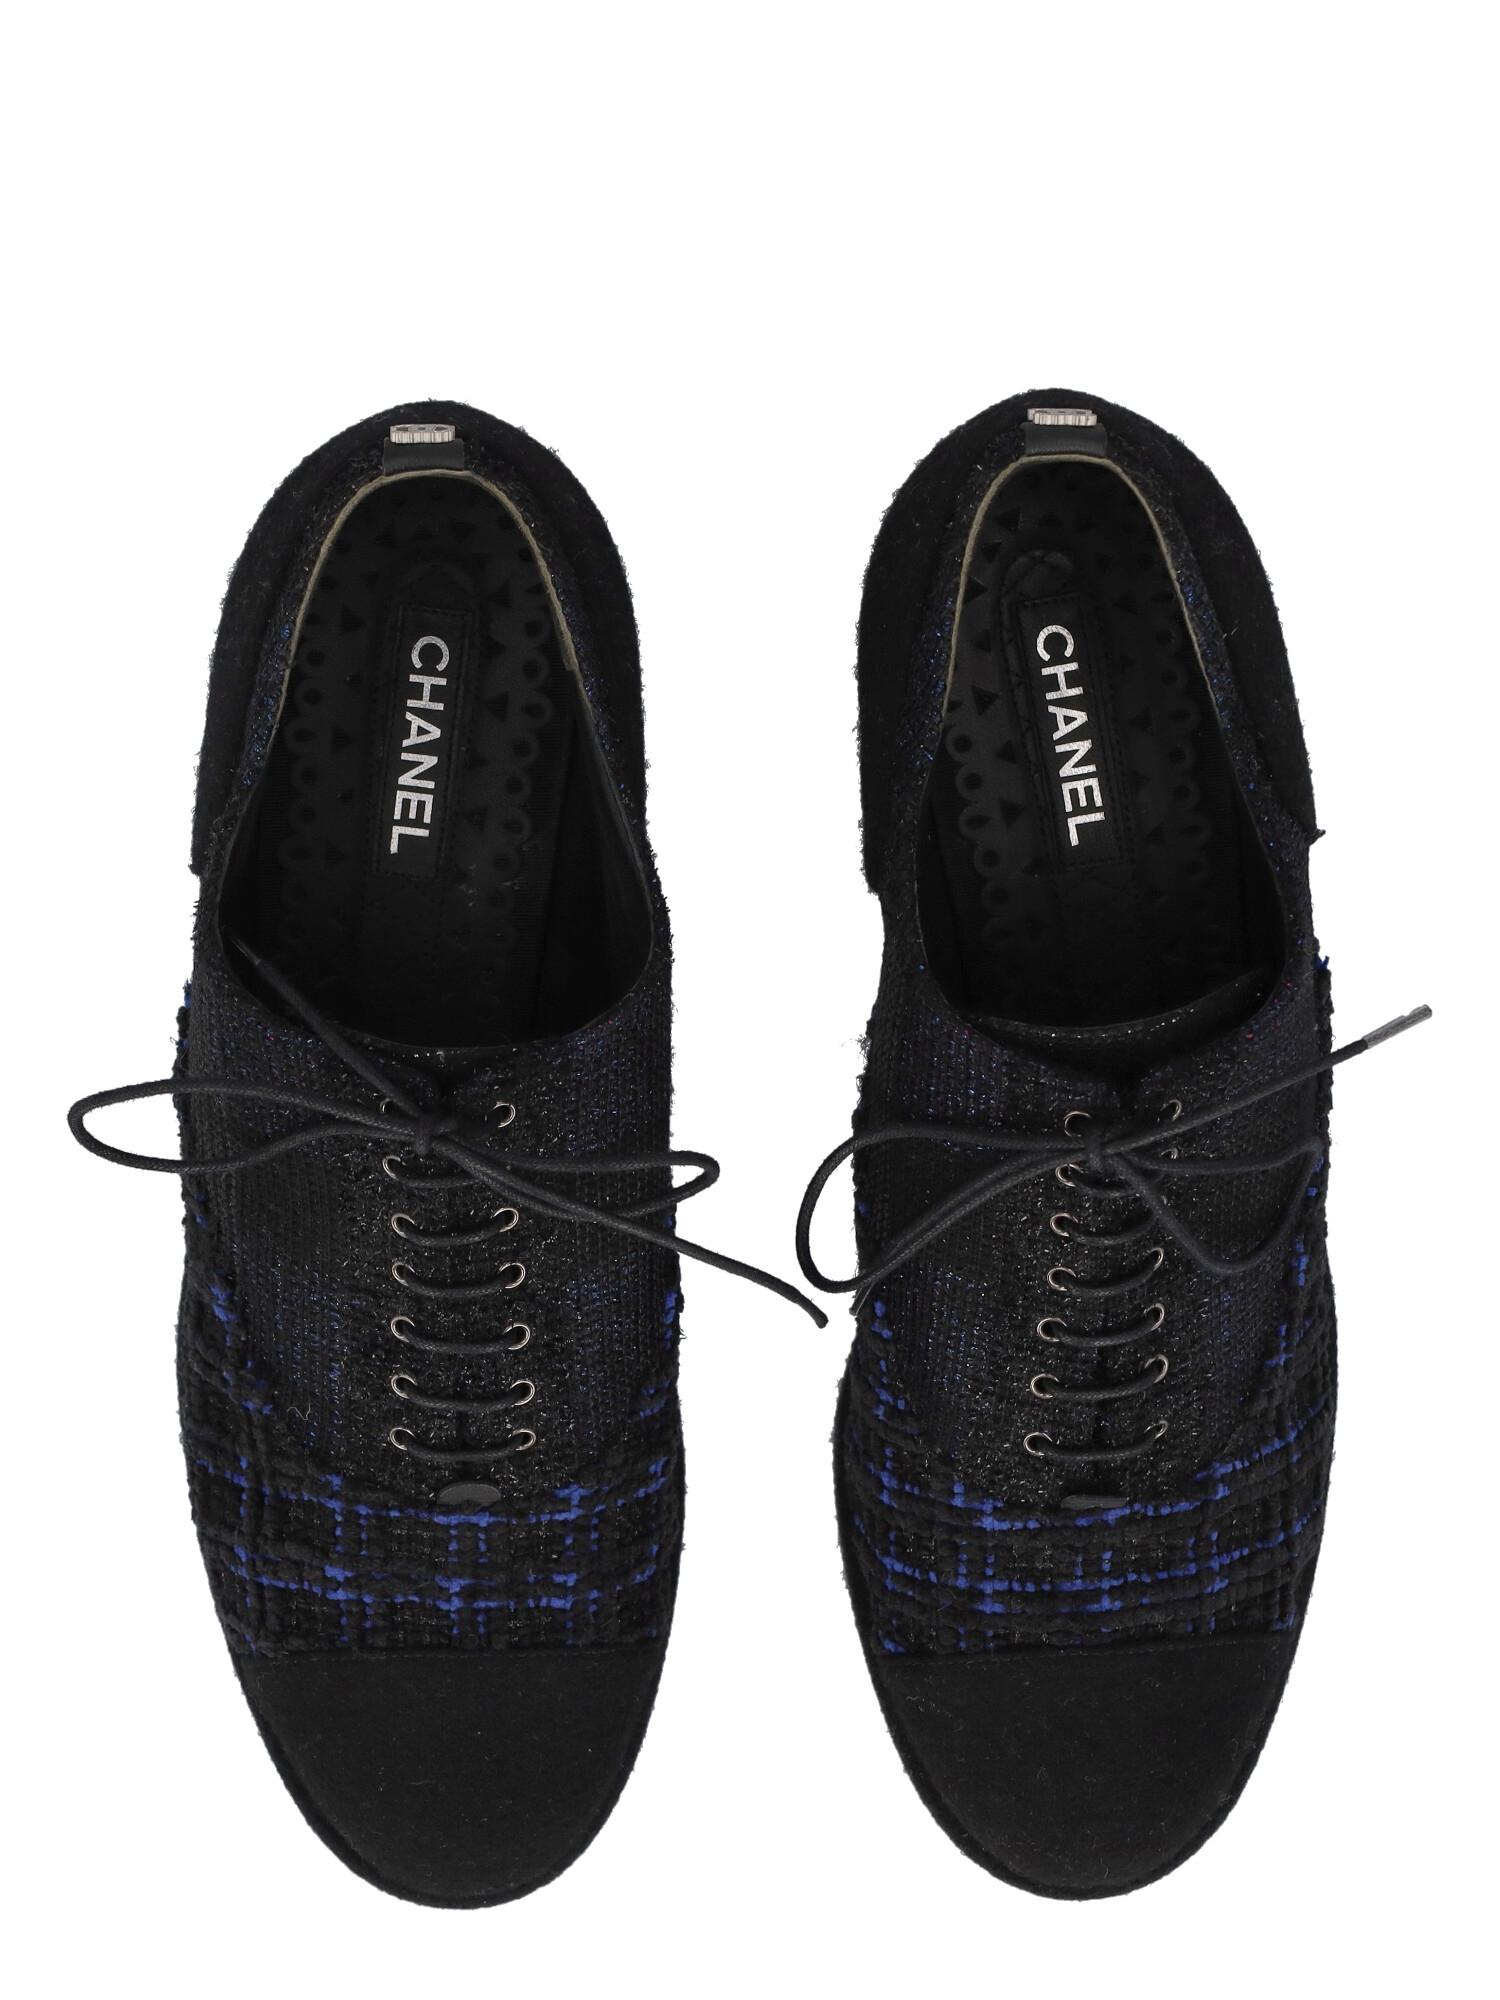 Chanel Women Lace-up Black, Navy Fabric EU 40.5 For Sale 1